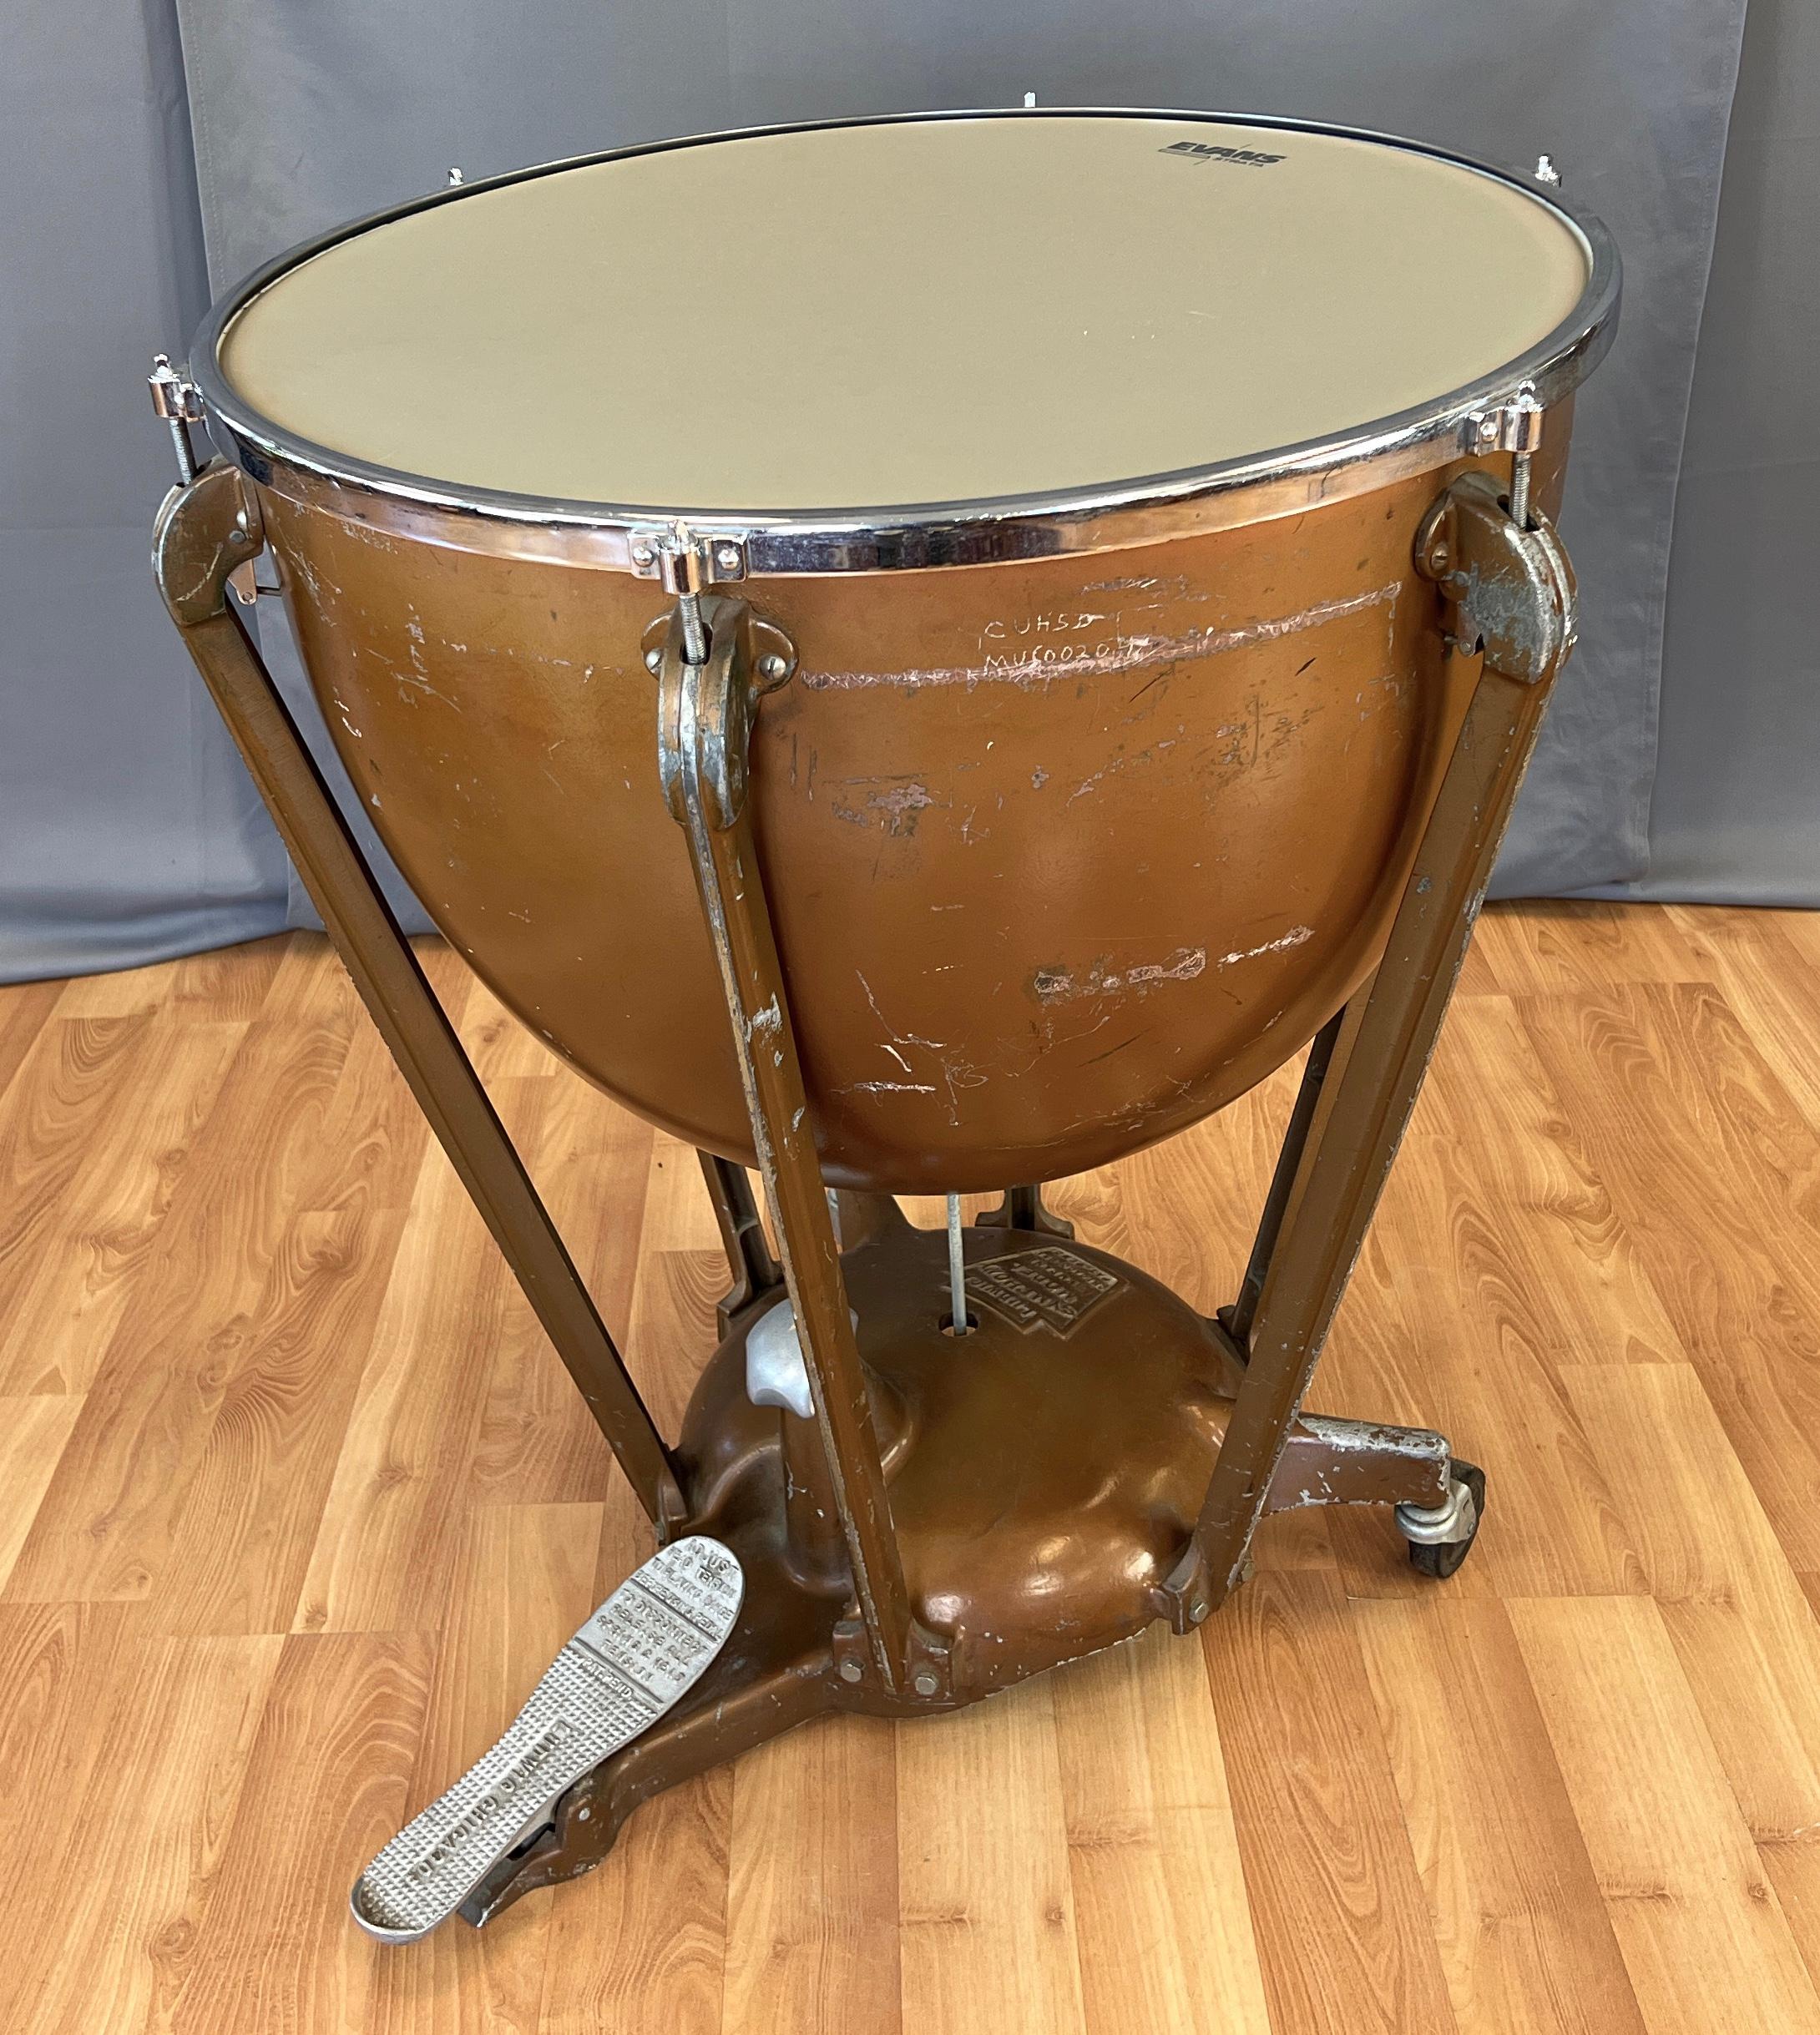 Offered here is a Ludwig 26